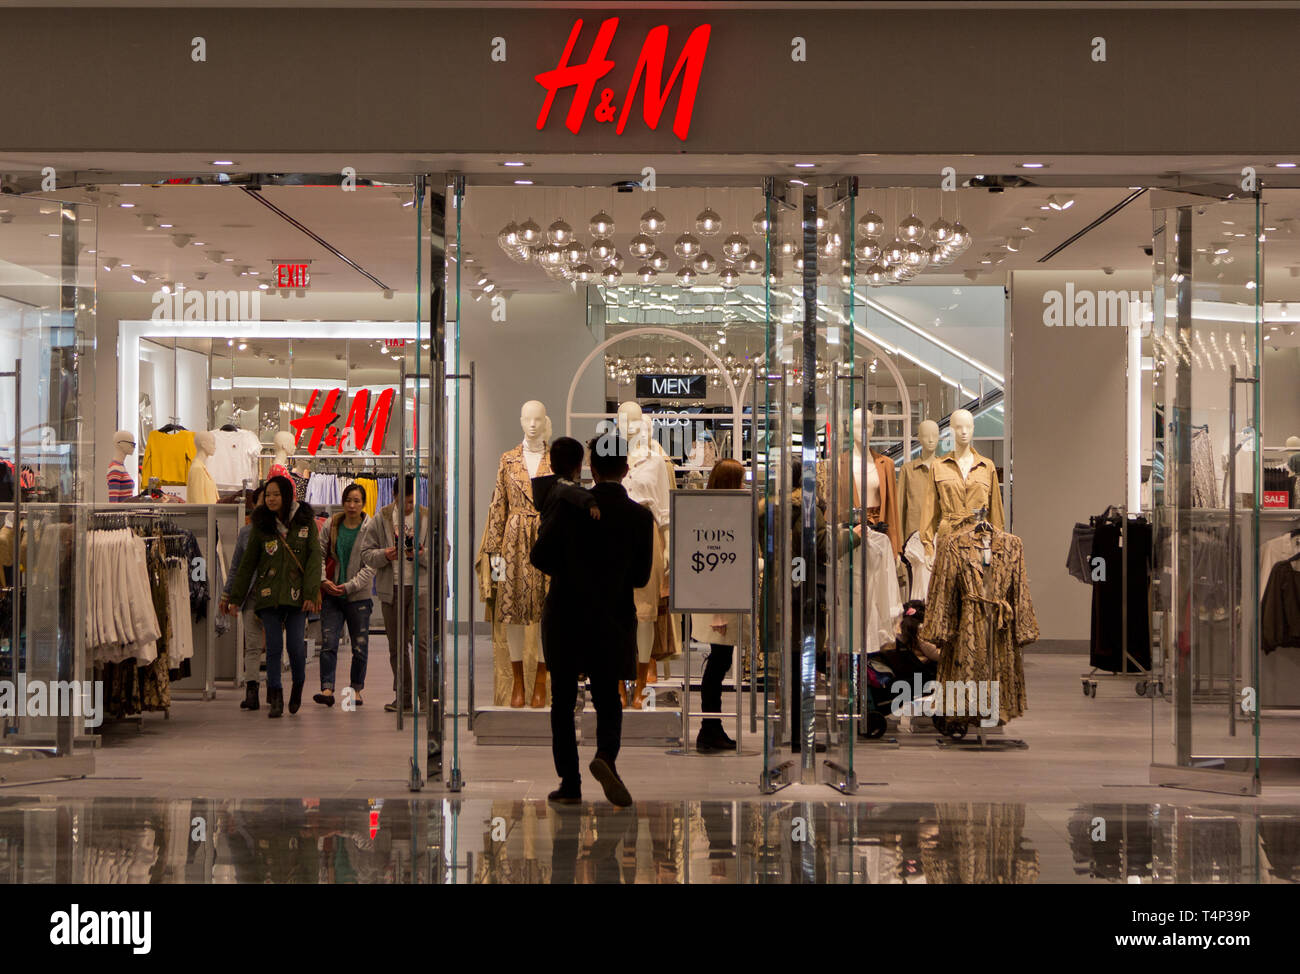 Back view of semi-silhouetted man carrying toddler boy, walking into H&M clothing shop/store at the mall in the new Hudson Yards complex that had opened earlier that month, the highly reflective floor outside the doorway beneath his feet, while shoppers inside browse, or walk toward the exit. Hudson Yards, New York's newest neighborhood, debuted 15 March 2019, to controversy about whether it was too elitist. According to a company press release, the development 'brings together for the first time the West Side and the neighboring districts of Chelsea and Hell’s Kitchen'. Stock Photo